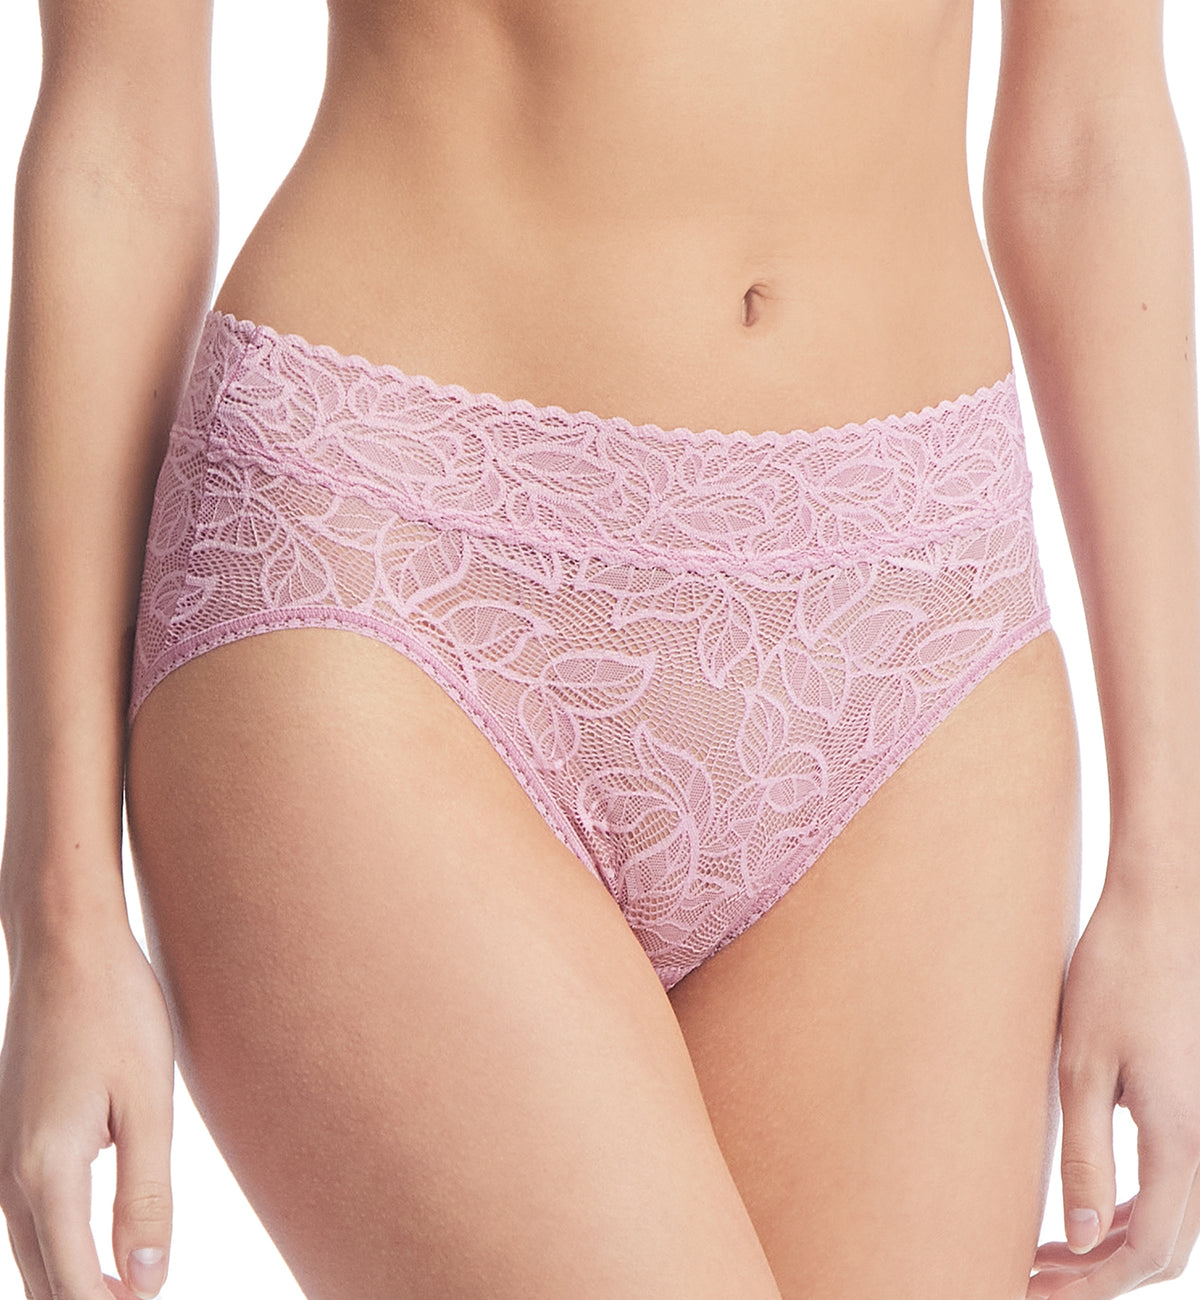 Hanky Panky Re-Leaf French Brief (5W2464),XS,Mauve Orchid - Mauve Orchid,XS